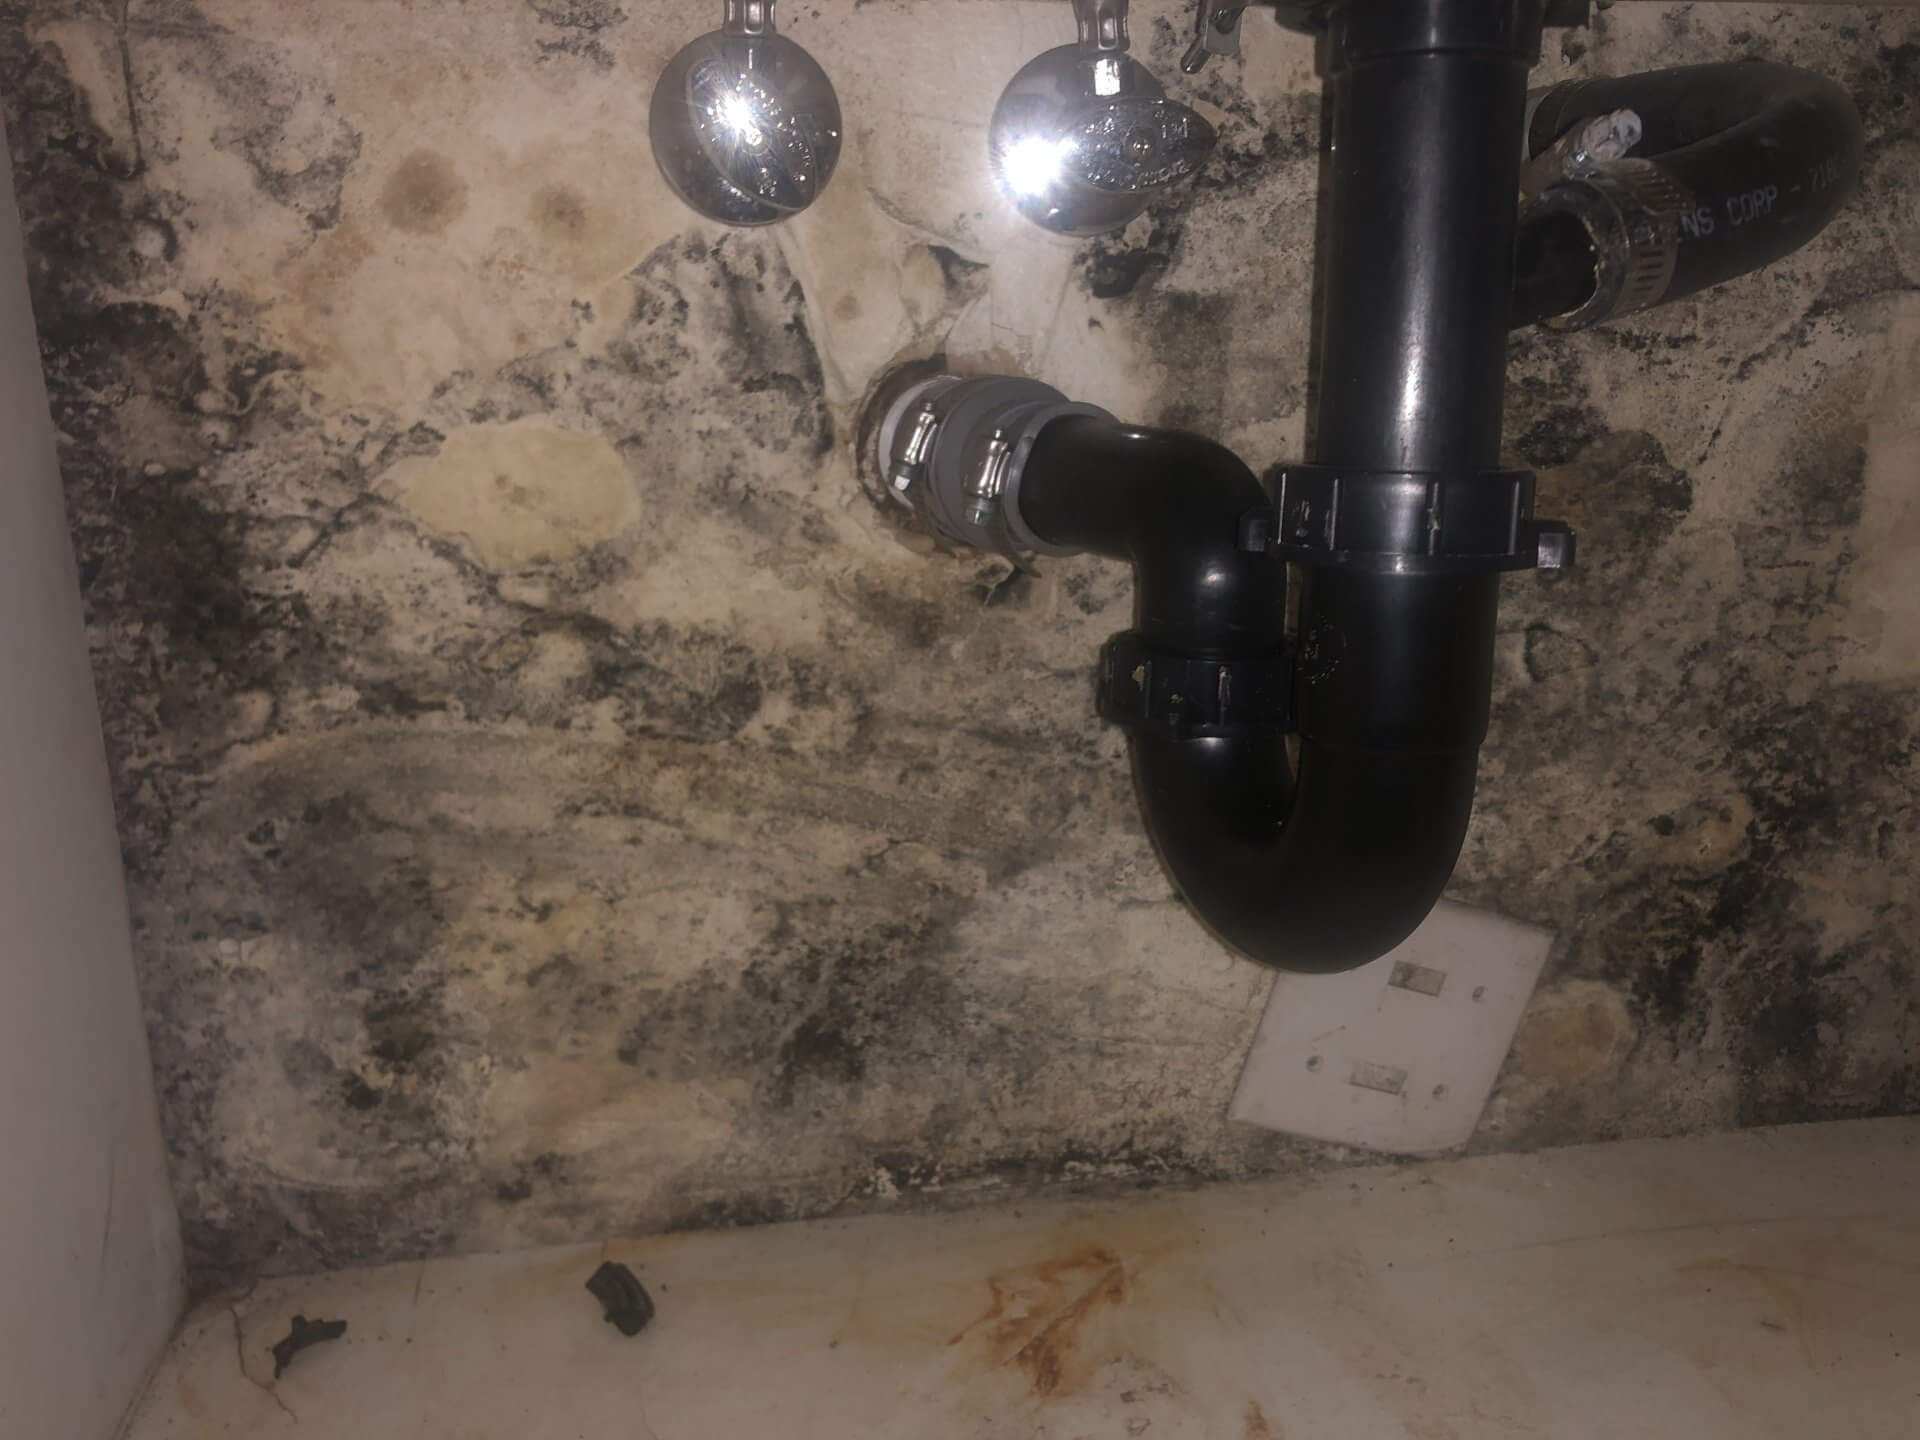 sewer smell coming out of my sink when iturn the water on